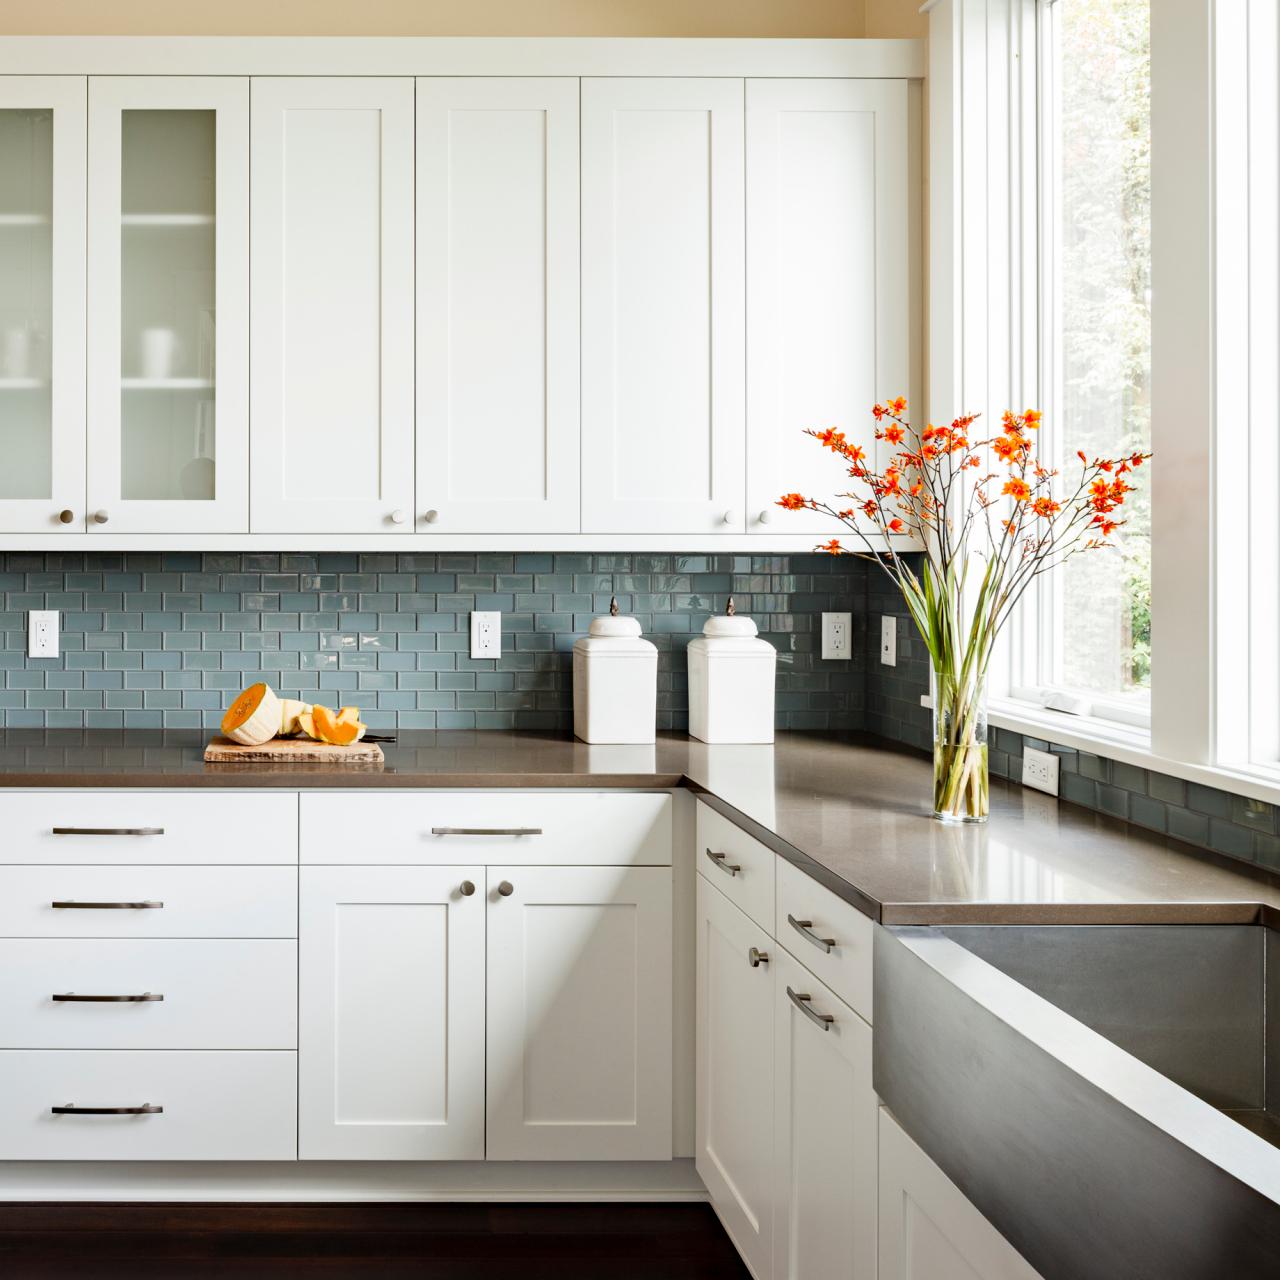 Kitchen Cabinet Materials: Pictures, Options, Tips & Ideas ...
